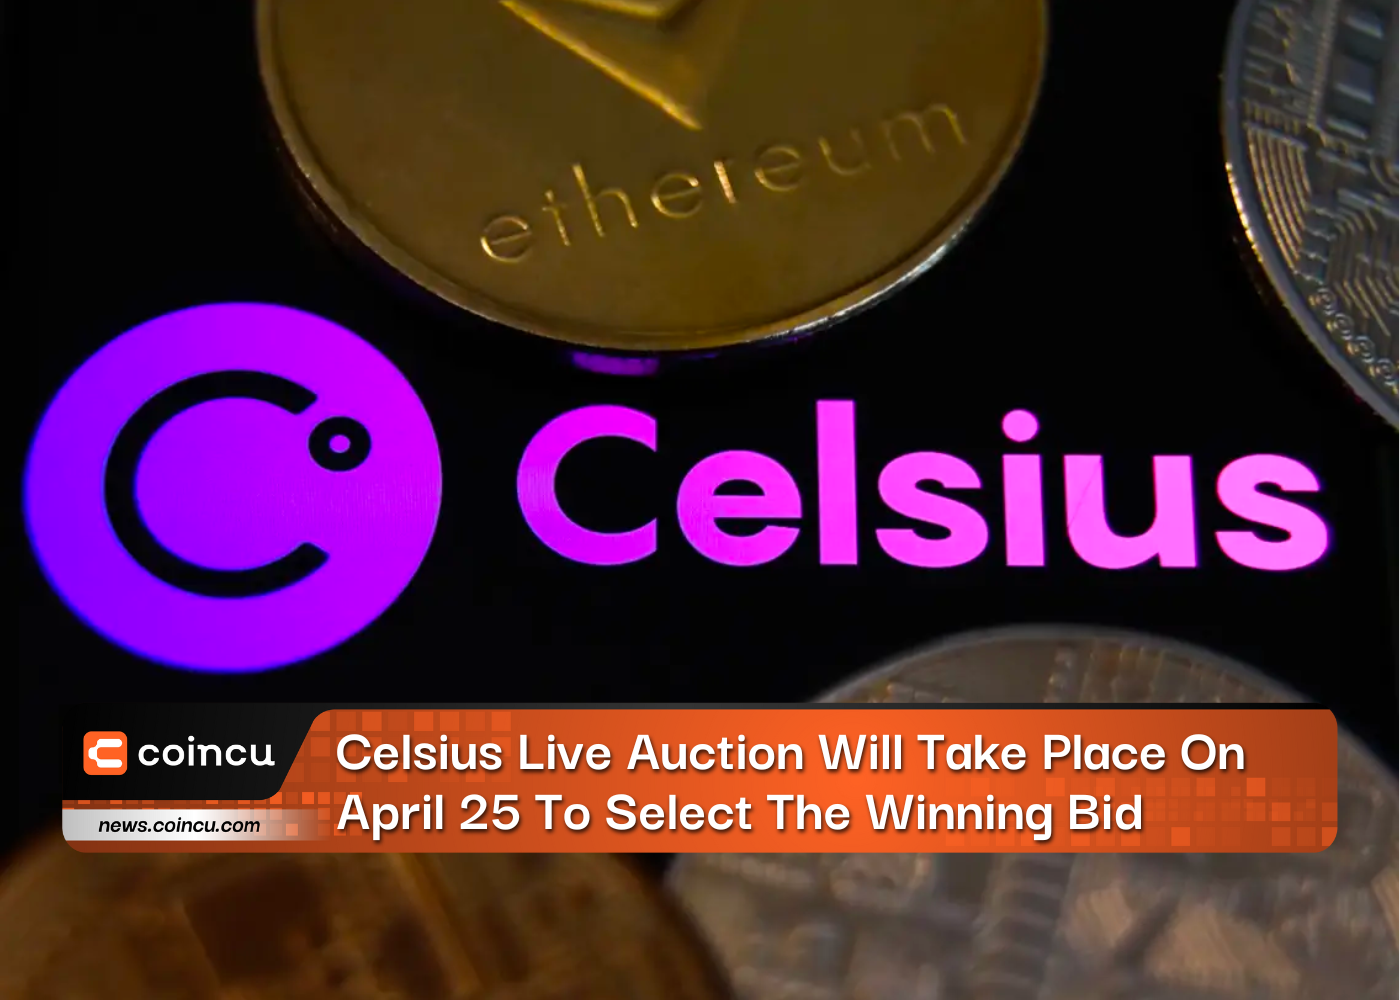 Celsius Live Auction Will Take Place On April 25 To Select The Winning Bid